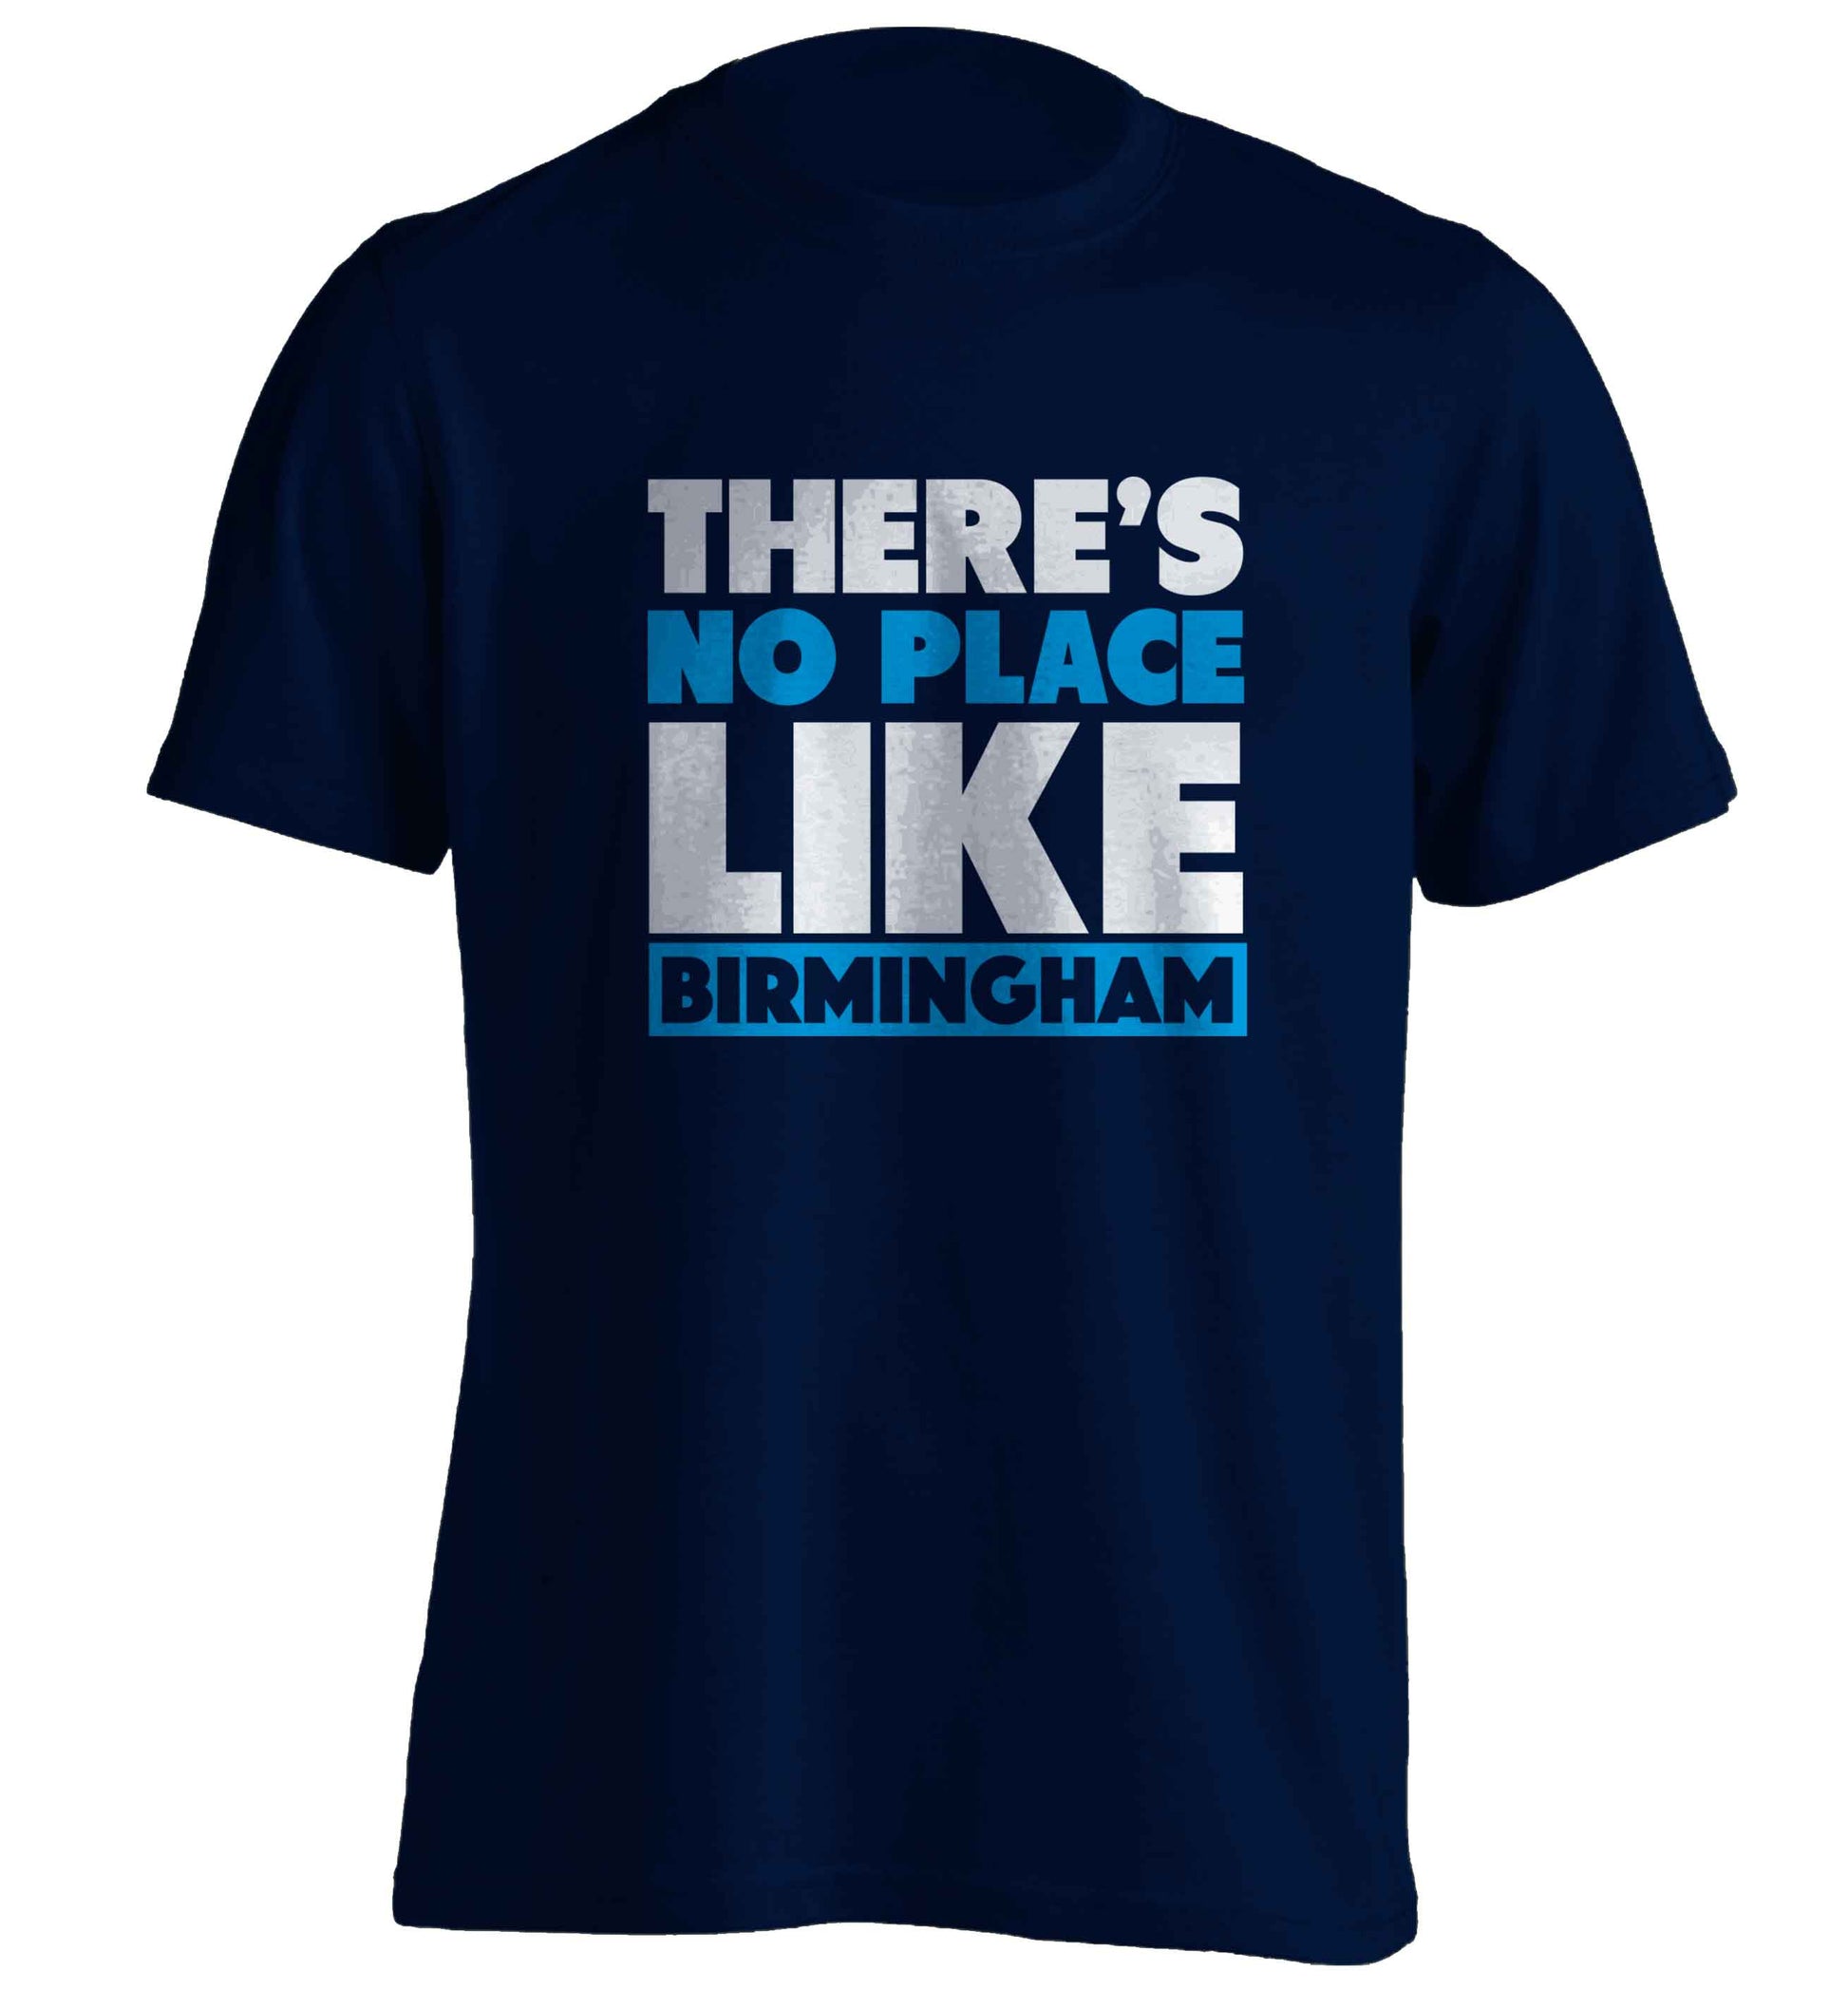 There's no place like Birmingham adults unisex navy Tshirt 2XL